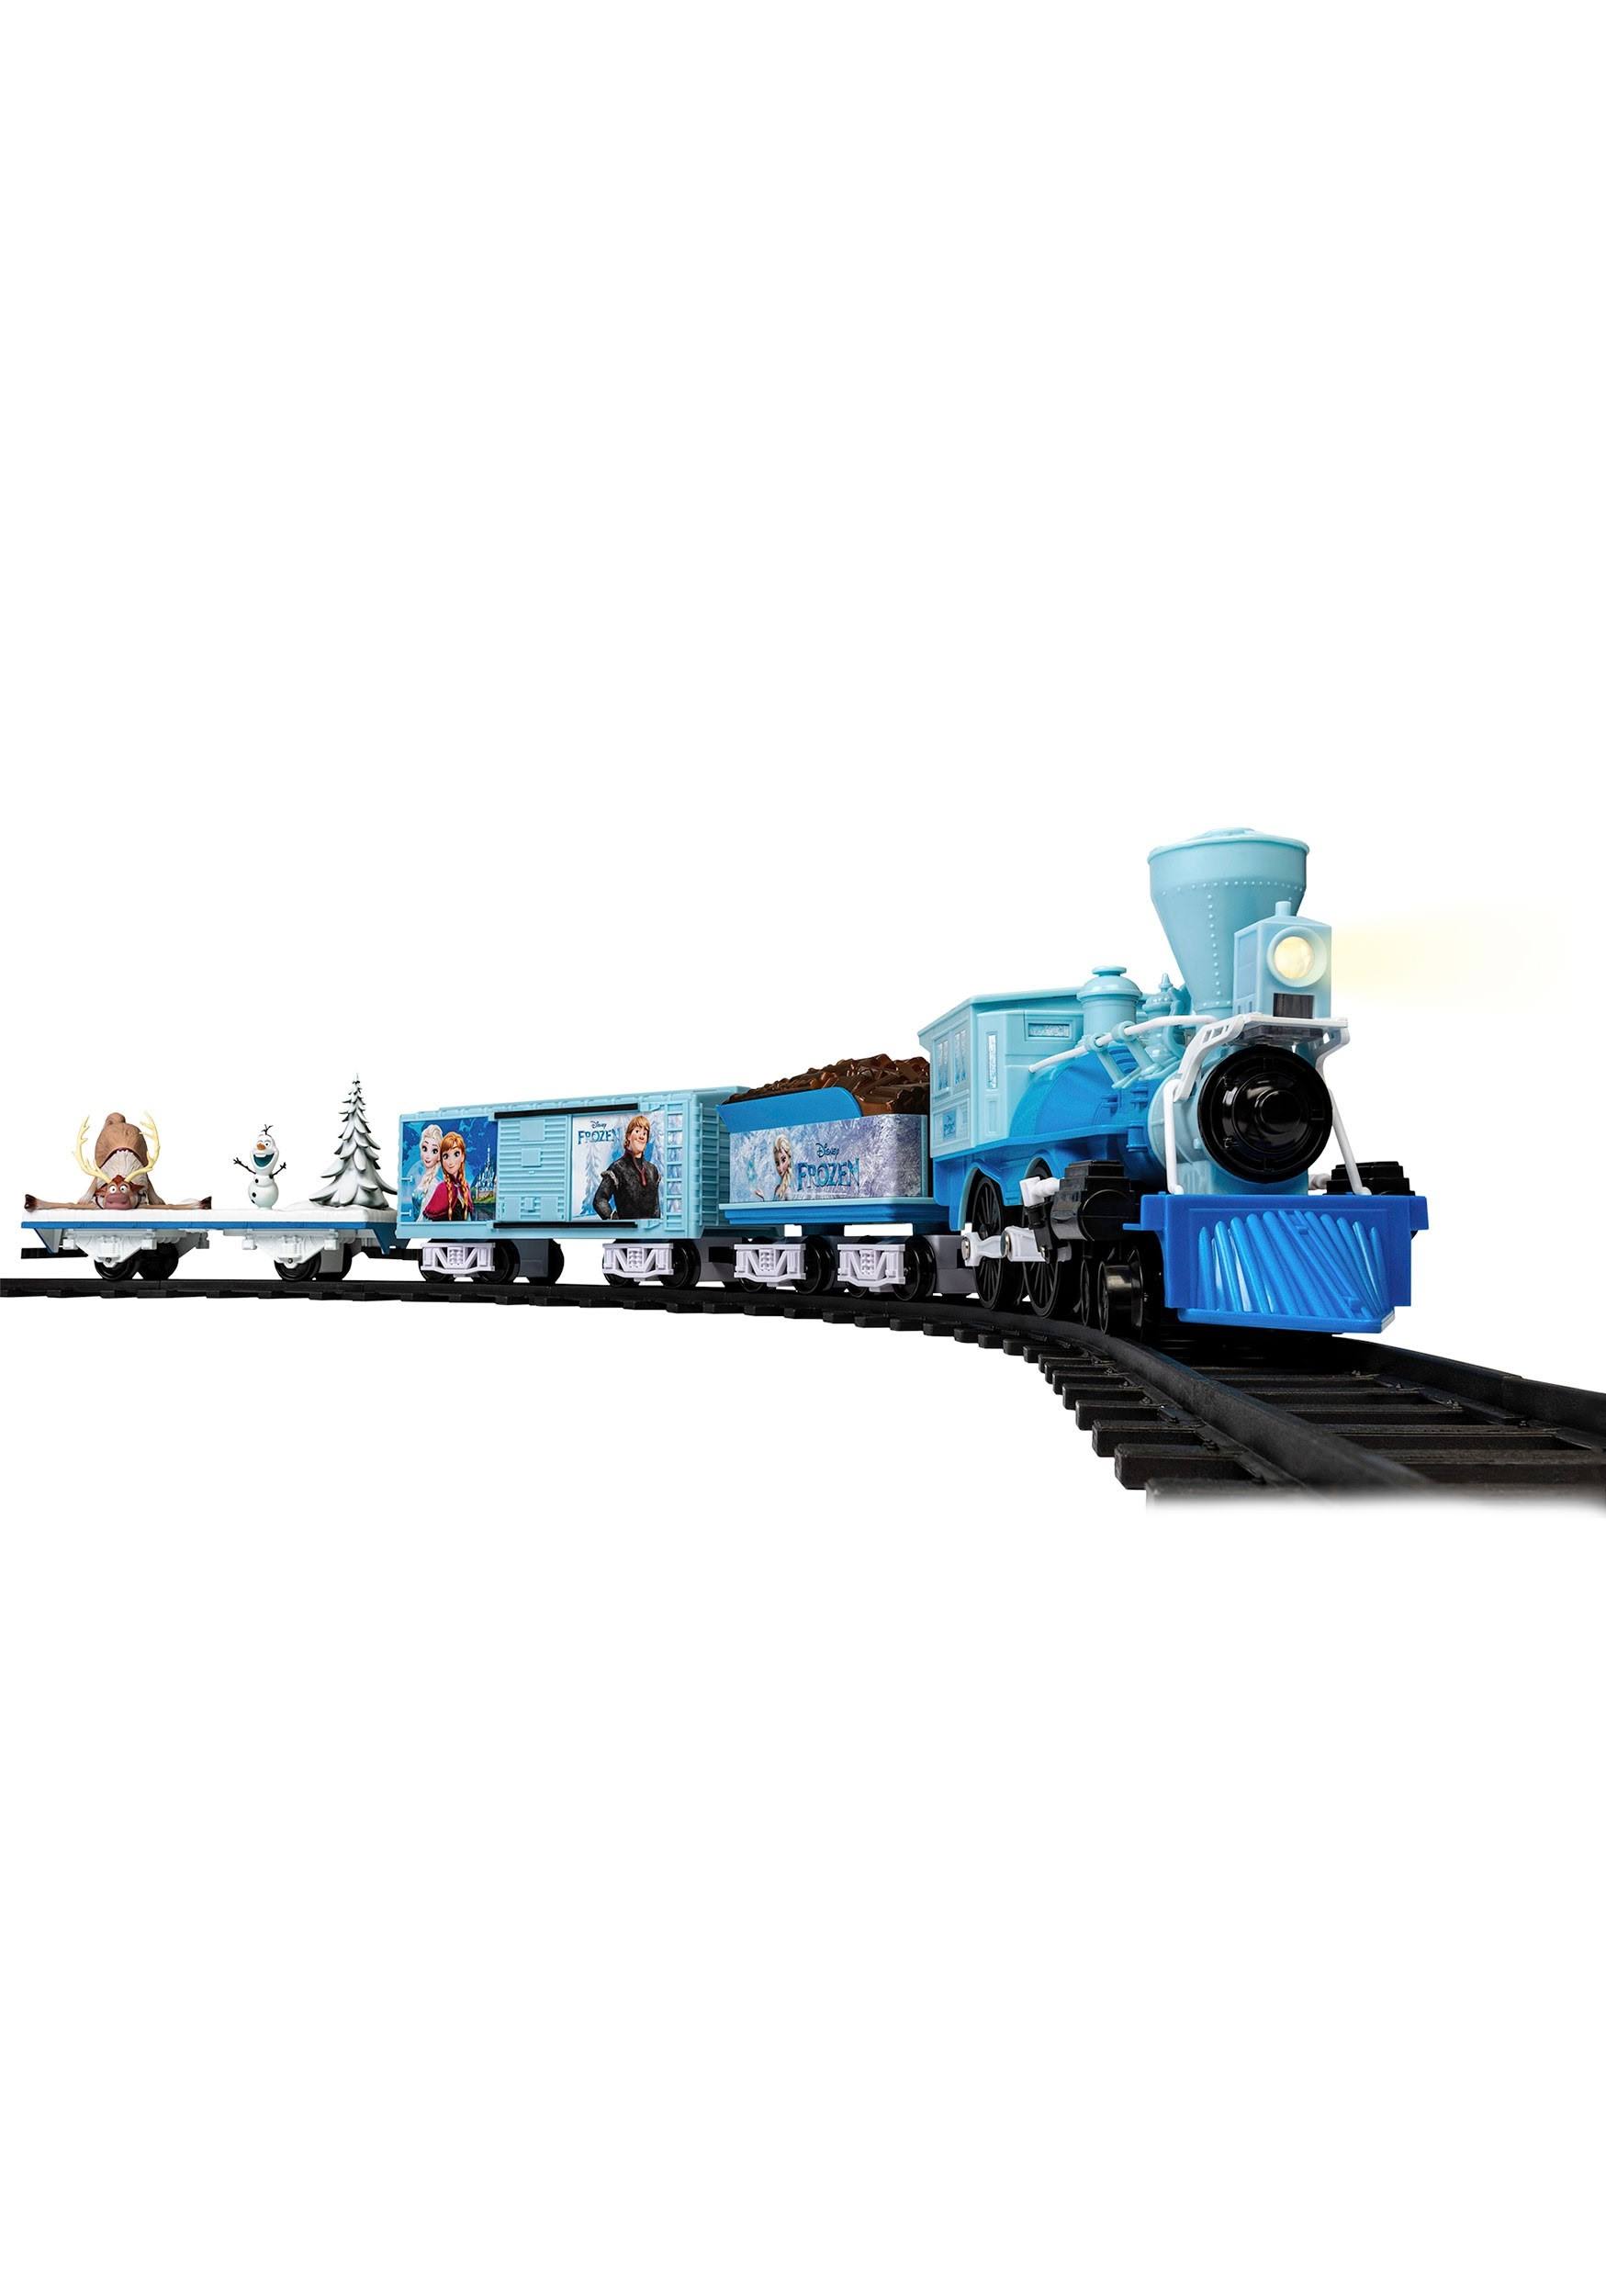 Lionel 711940 Disney Frozen Ready to Play Train O Scale